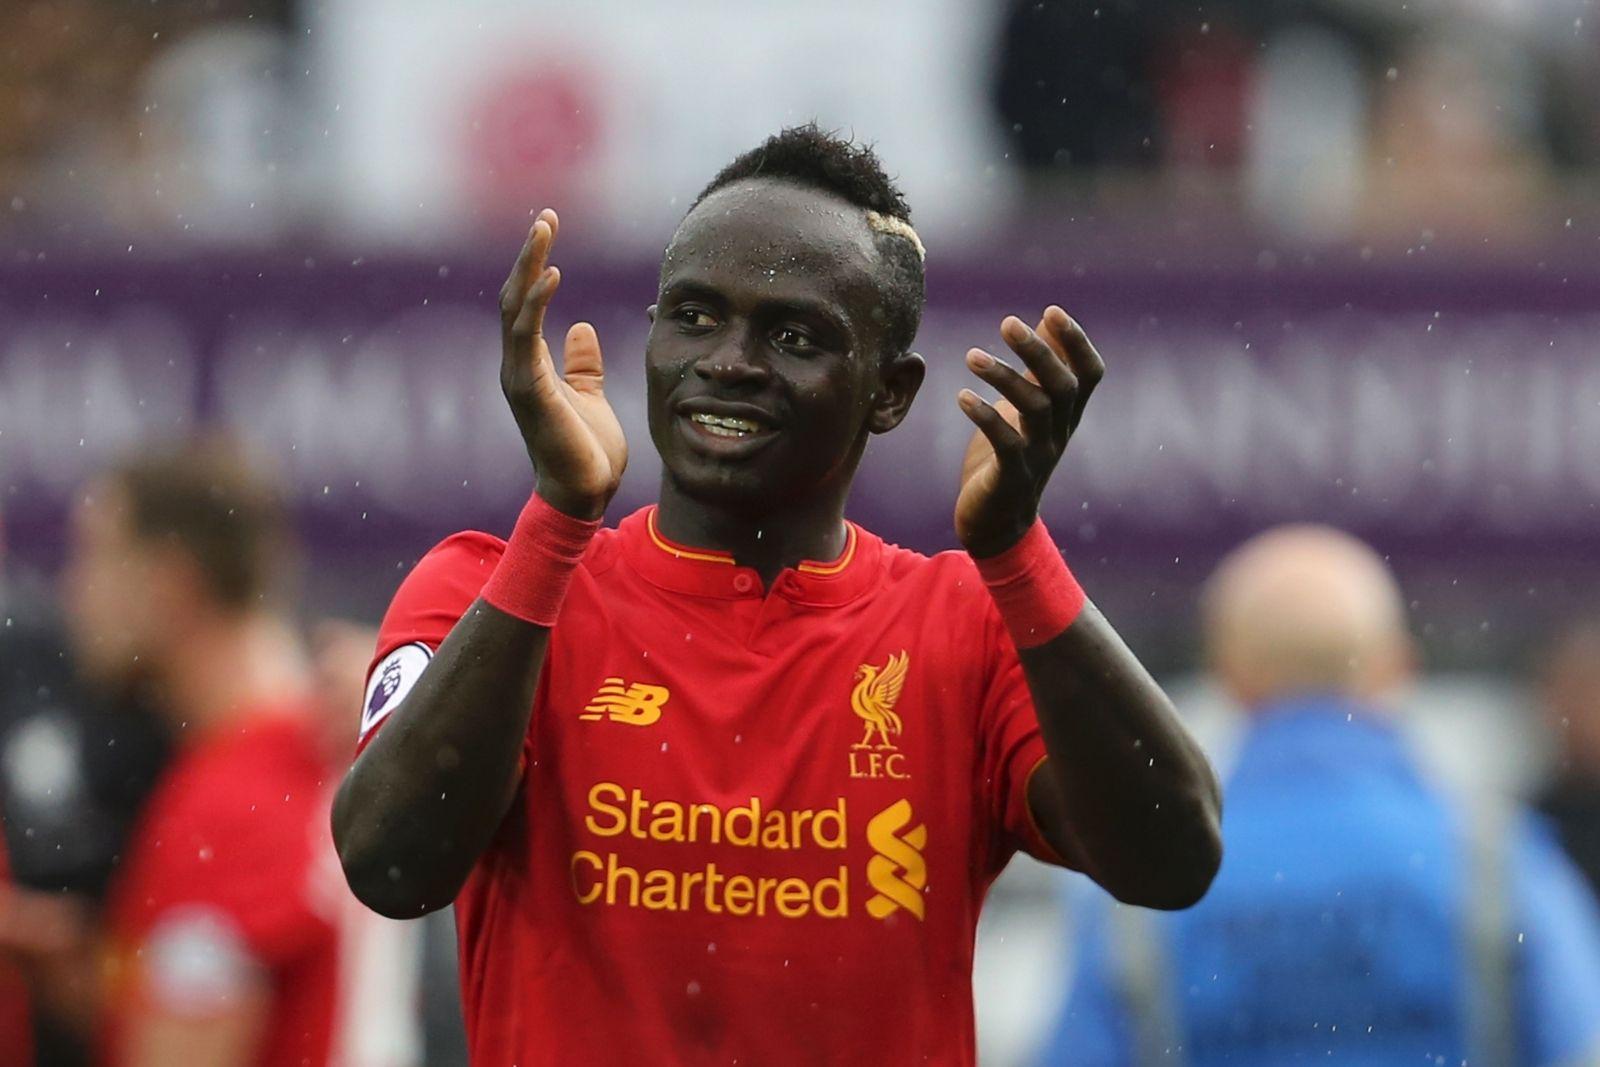 Sadio Mane reveals he snubbed United and moved to Liverpool